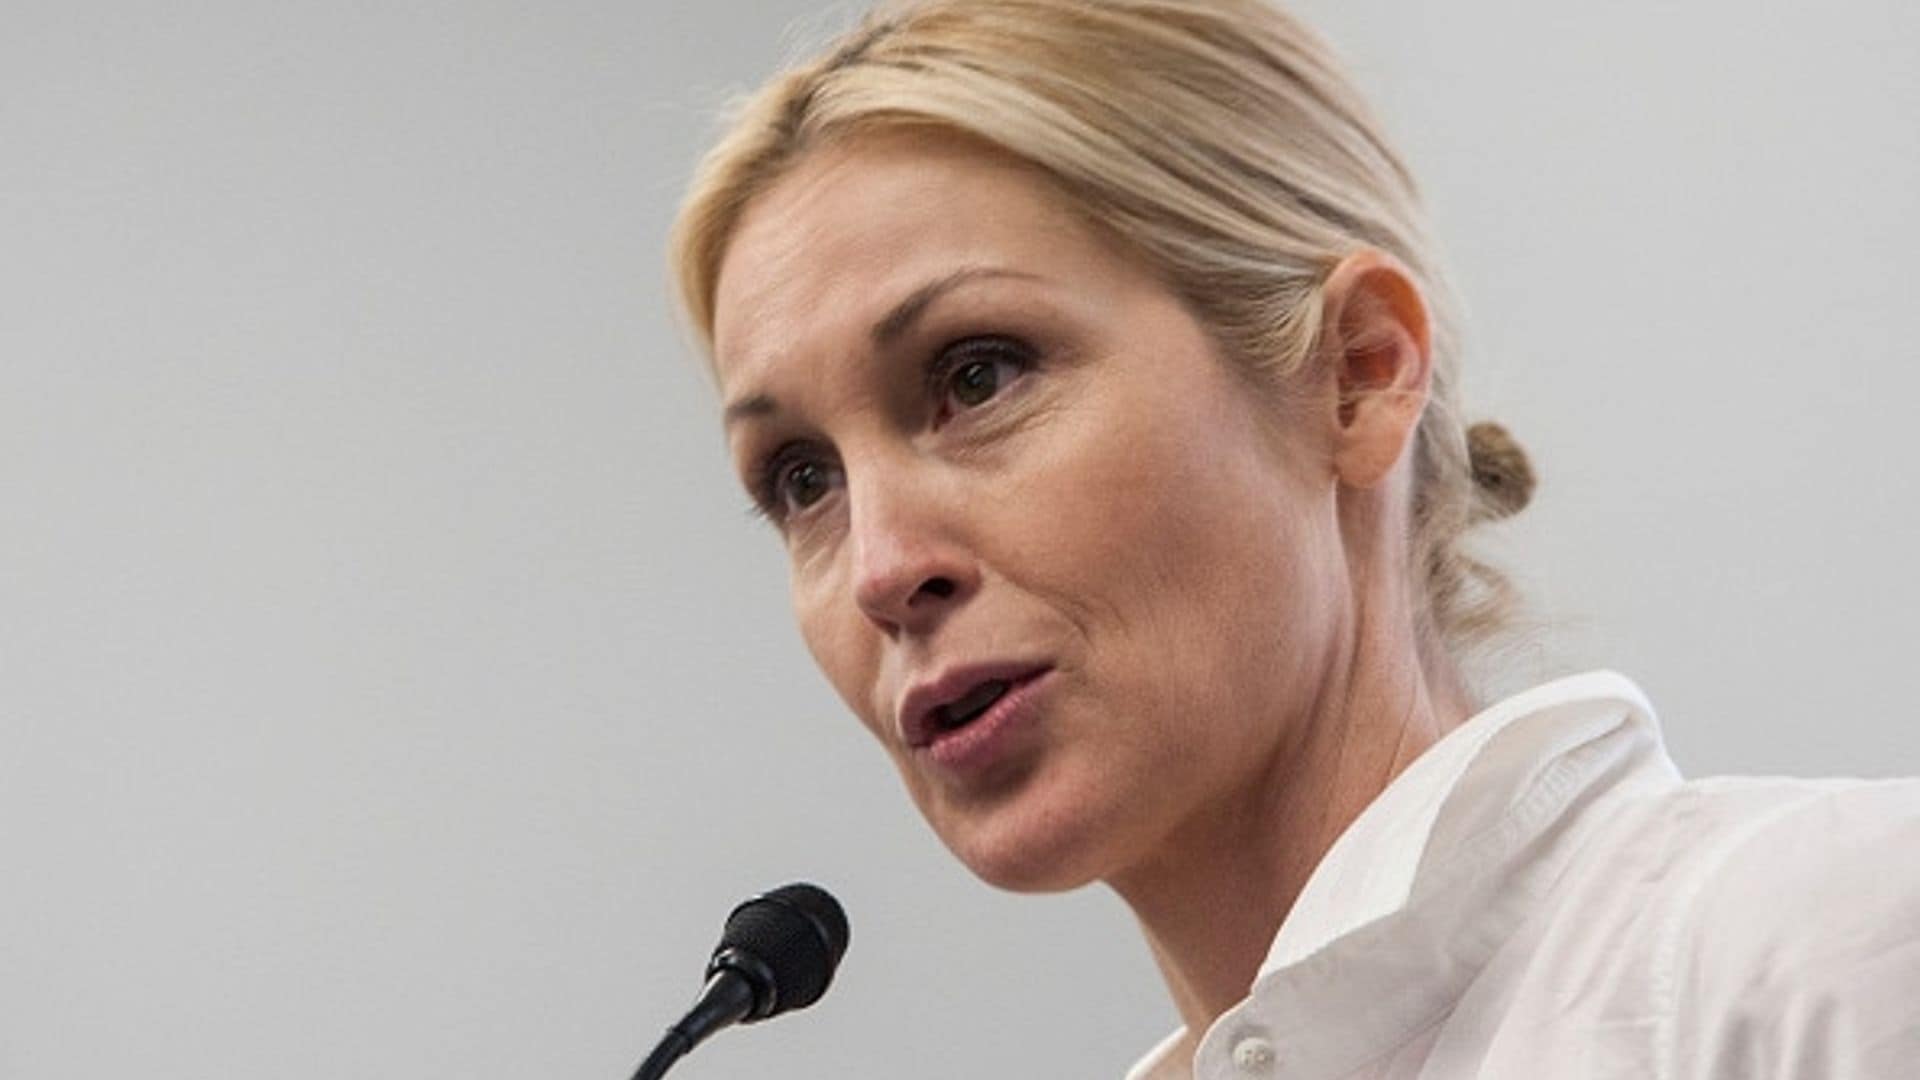 Kelly Rutherford's custody petition won't get reply from President Obama